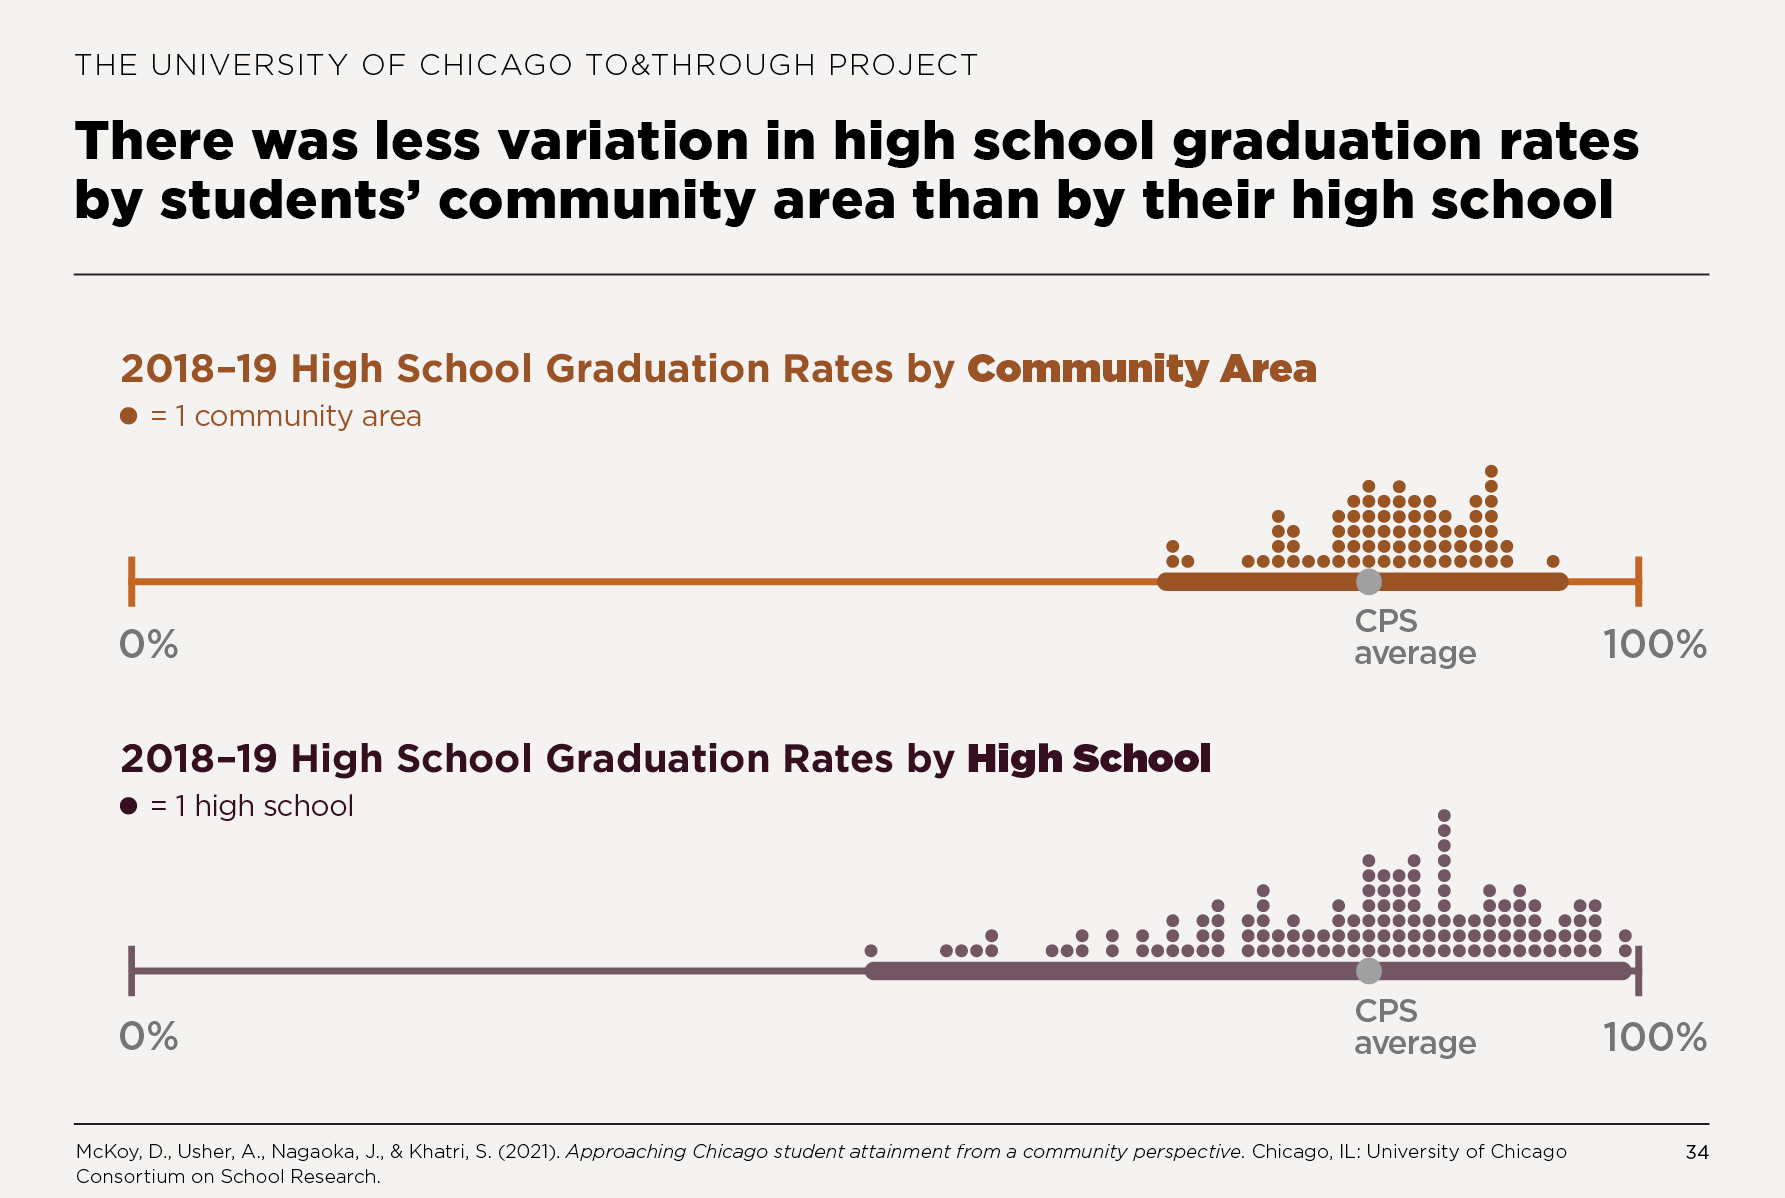 There was less variation in high school graduation rates by students’ community area than by their high school